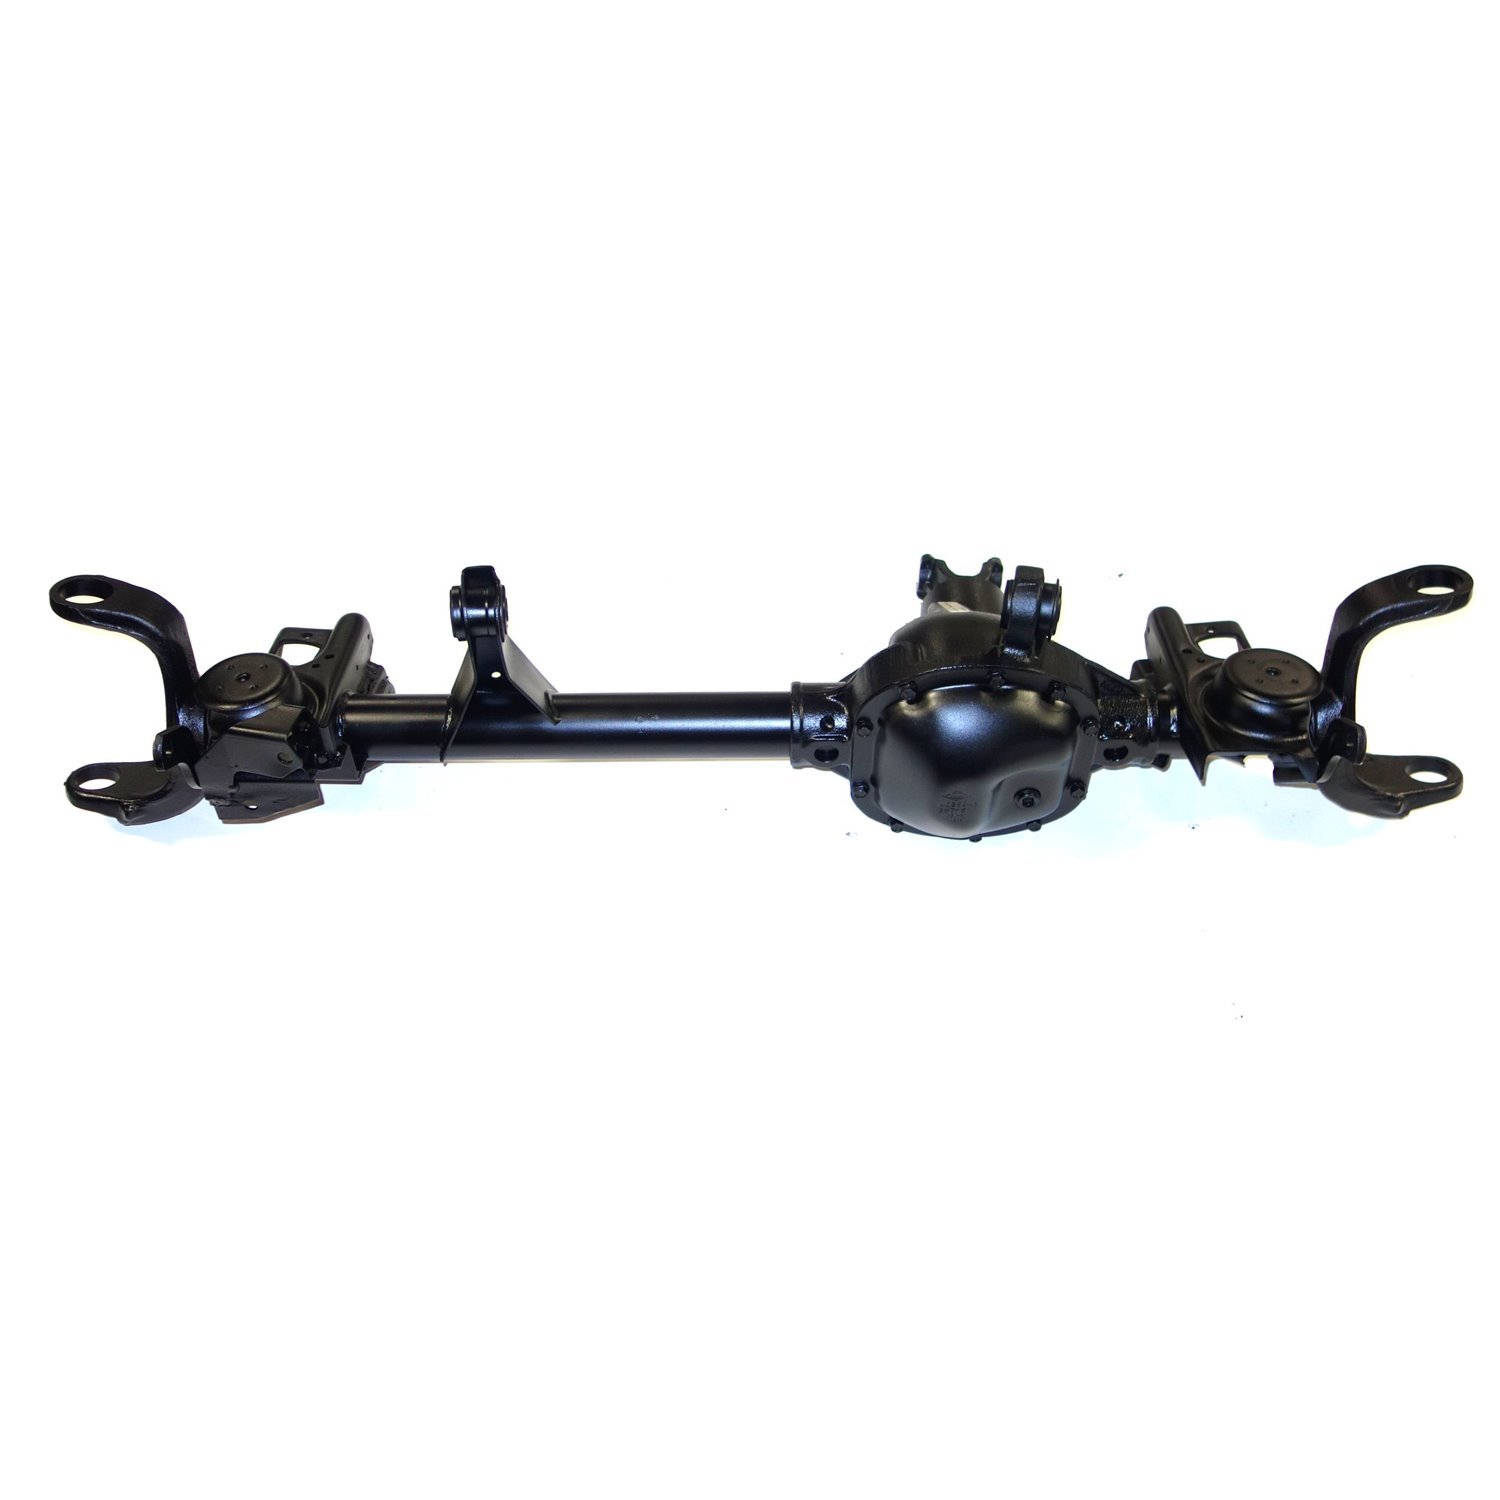 Remanufactured Dana 30 Axle Assembly for 2007-08 & 2011-15 Jeep Wrangler LHD, 3.21 Ratio